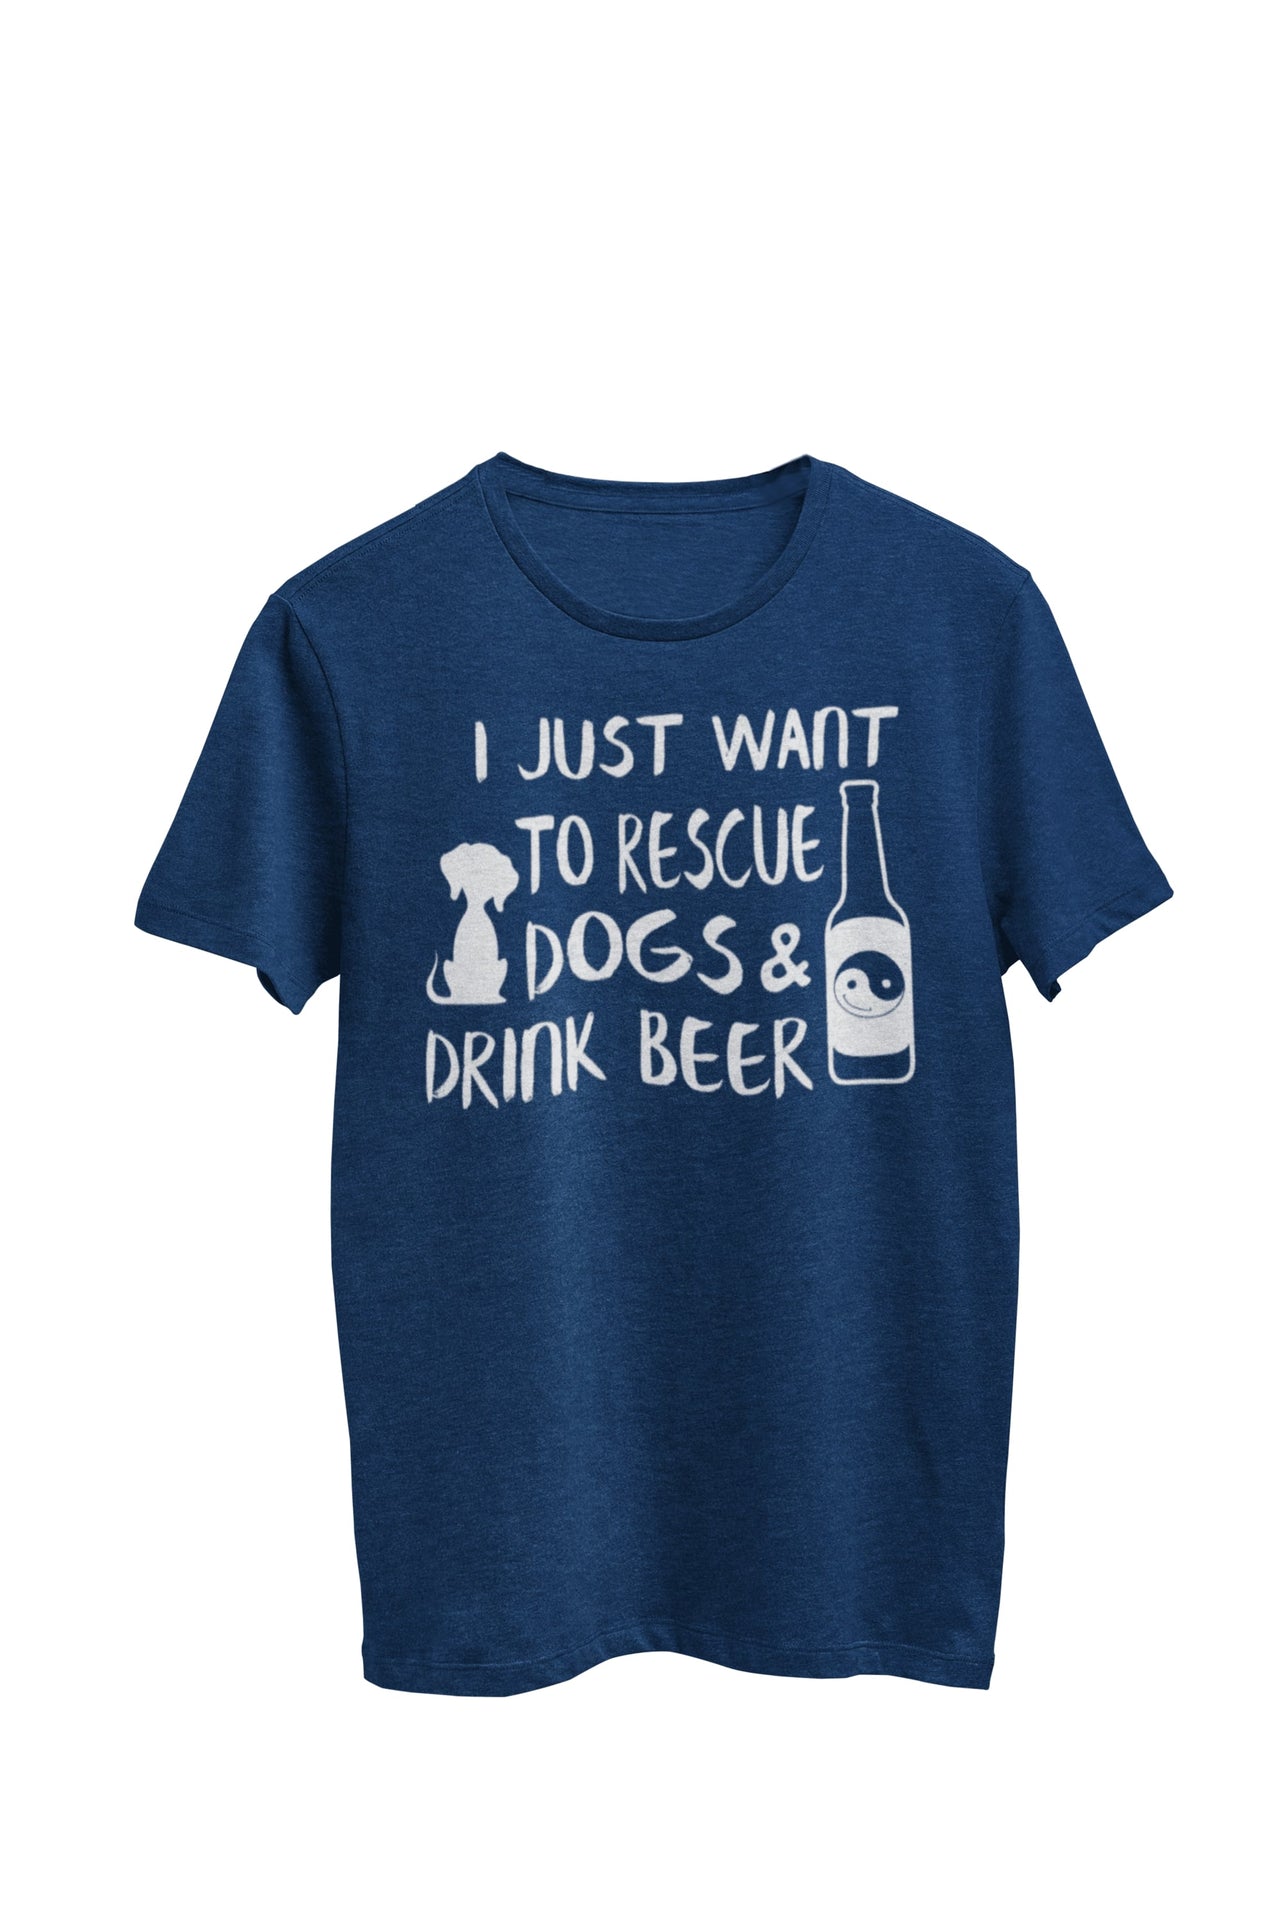 Heather Navy Unisex T-shirt with the text 'I just want to rescue dogs and drink beer,' showcasing an adorable dog beside a yin yang symbol on a beer bottle. Designed by WooHoo Apparel.